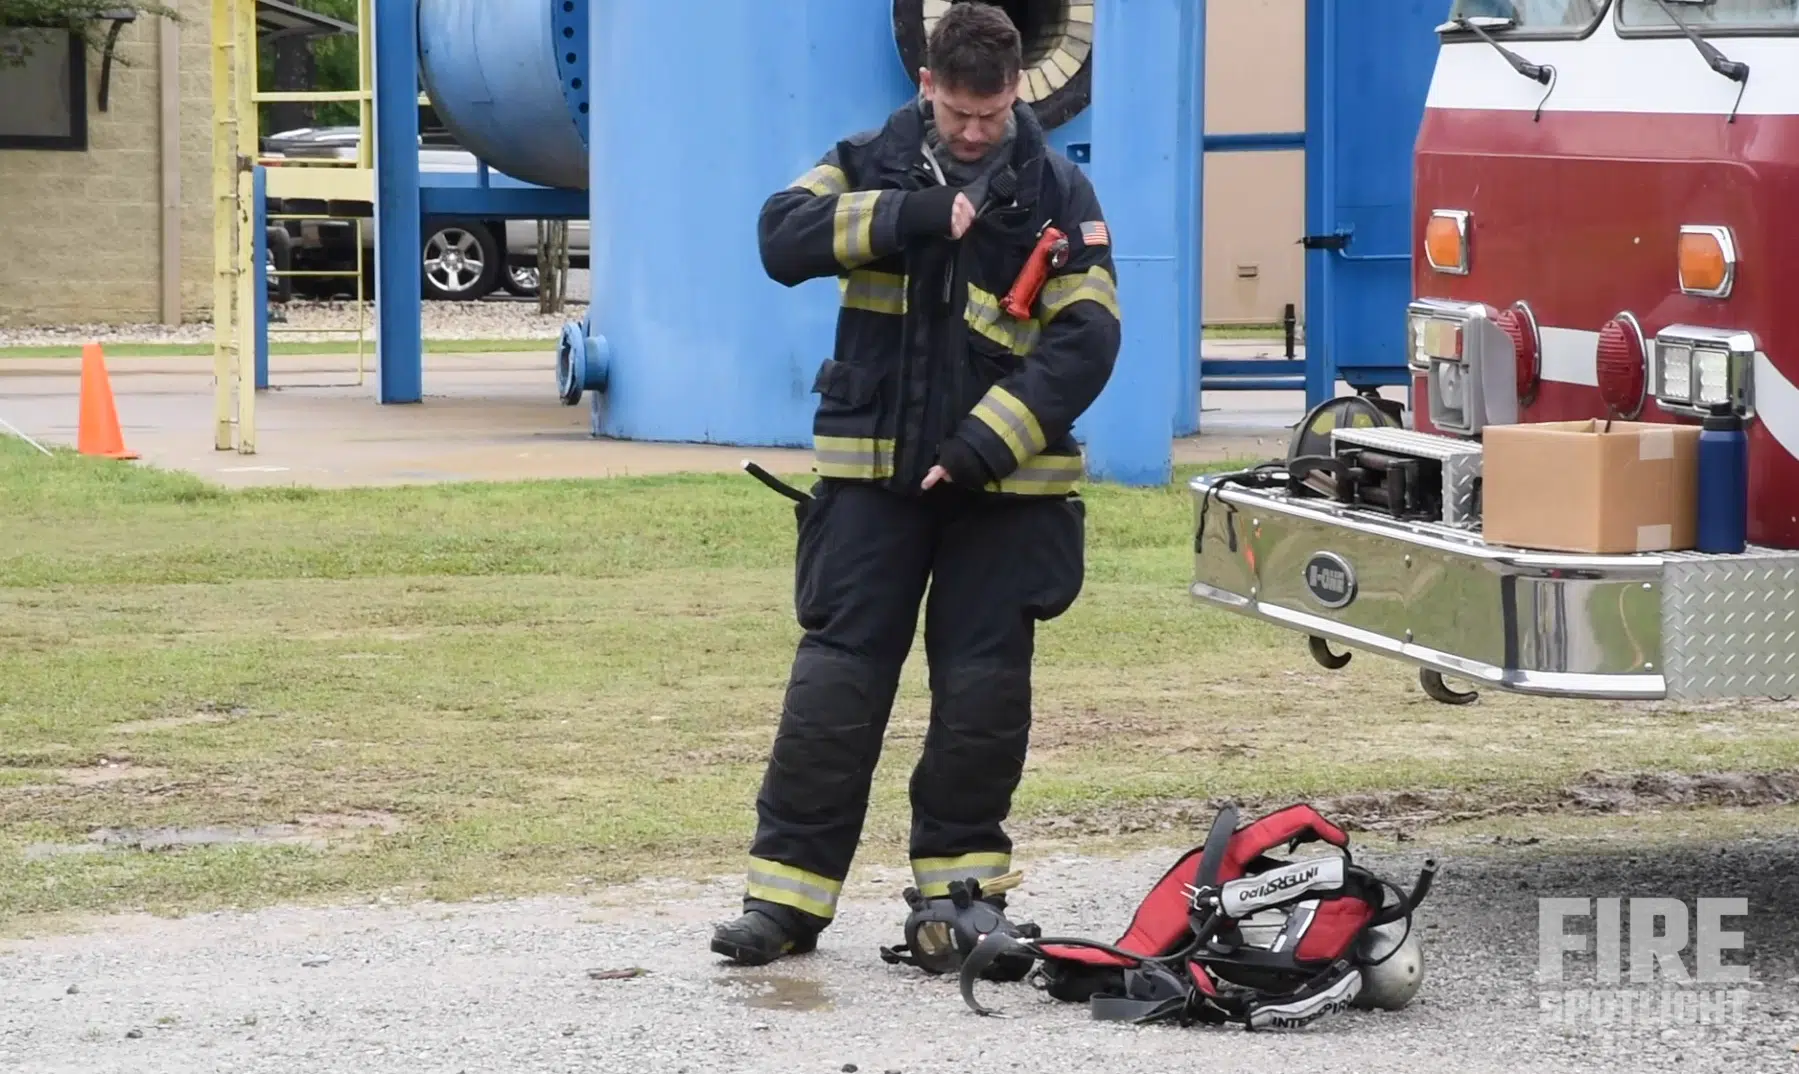 Featured image for “Fire Instructor Shaun McAteer Discusses his Firefighter Stories in this Firefighter Training Video”